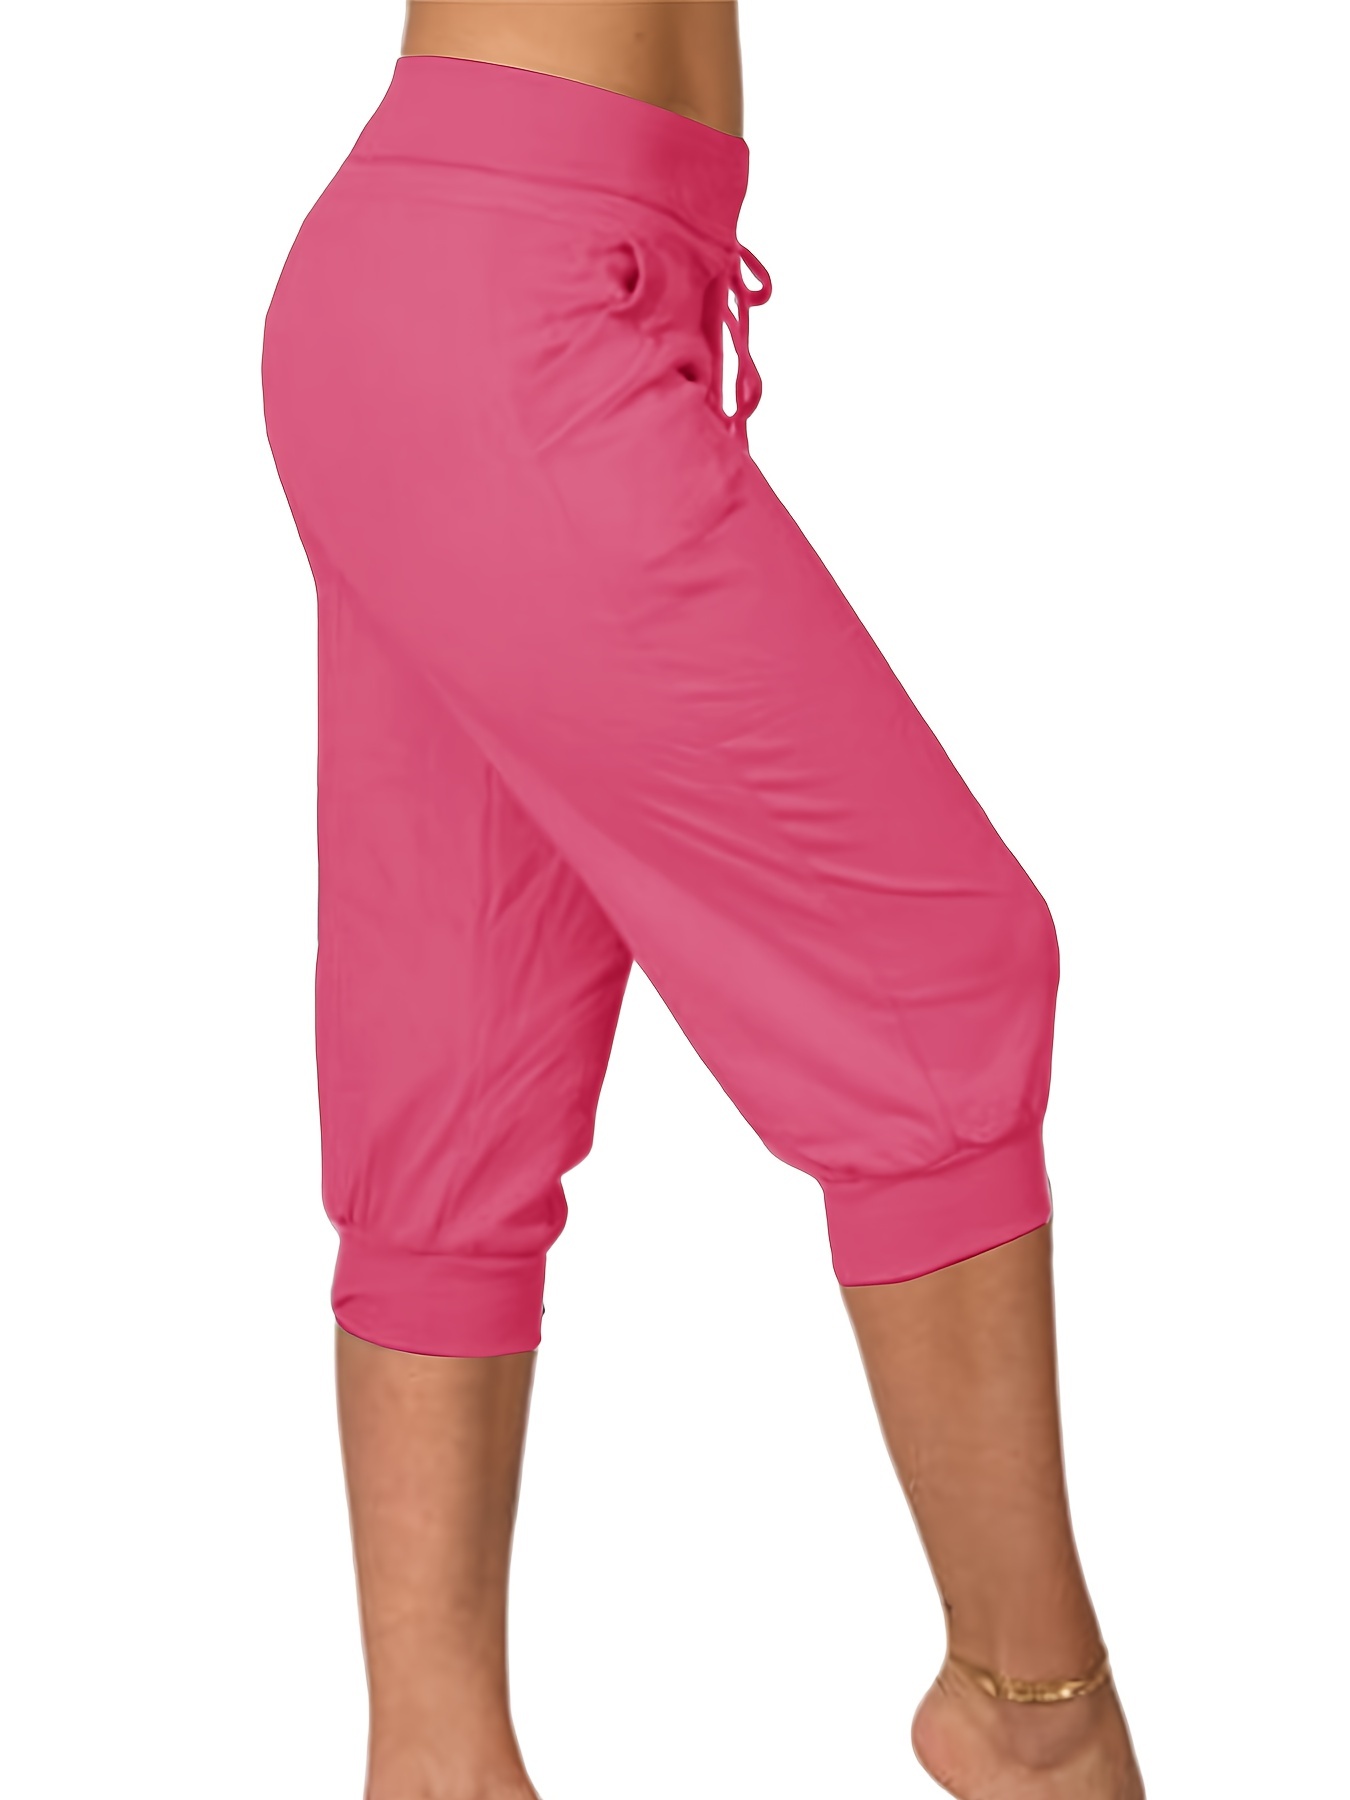 Women S Lole Romp Capri Athletic Pant Pink Lightweight Travel Outdoor  Athletic